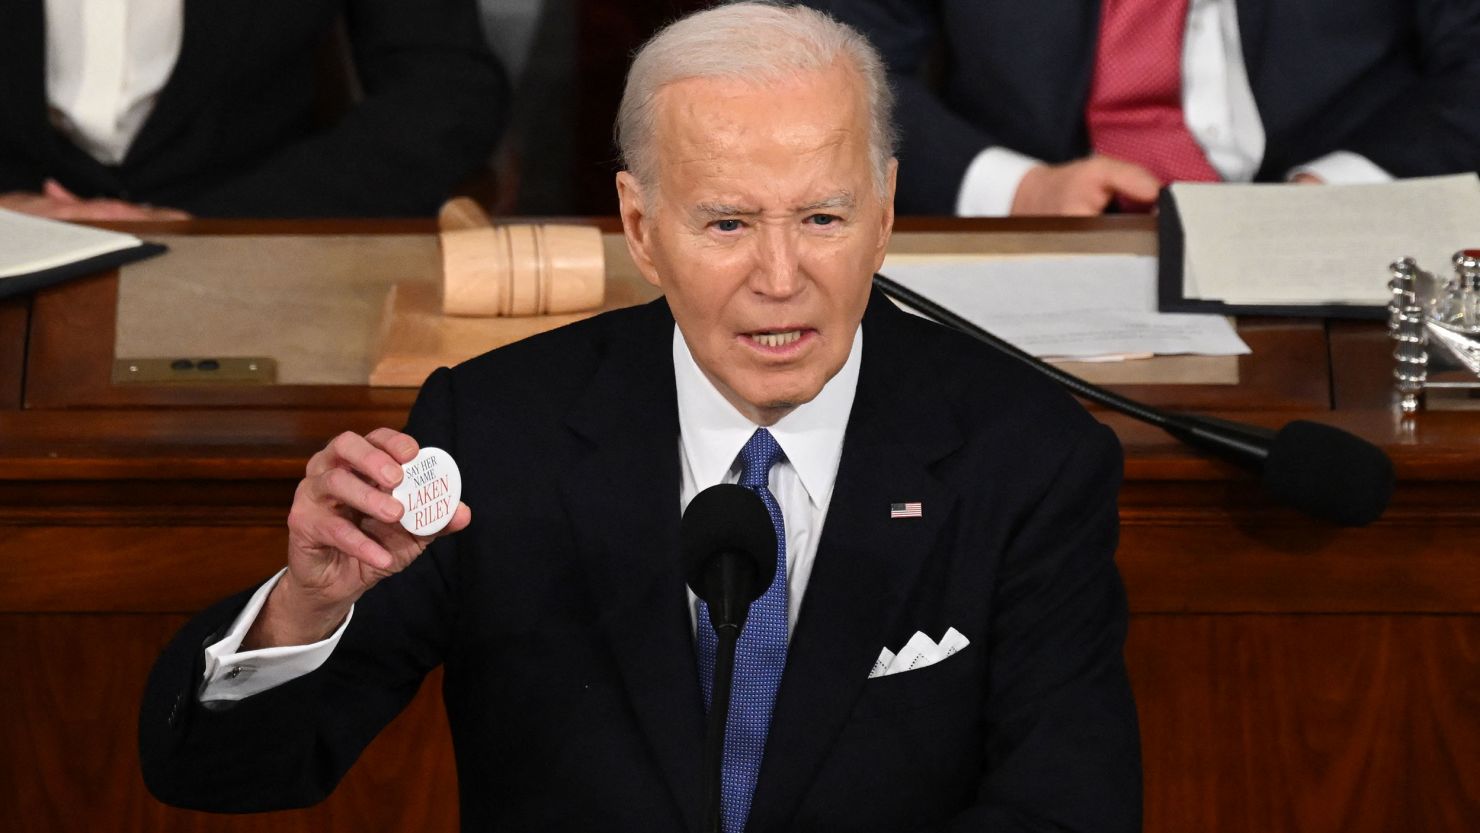 President Joe Biden holds a Laken Riley button while delivering the State of the Union address at the Capitol in Washington, DC, on March 7.